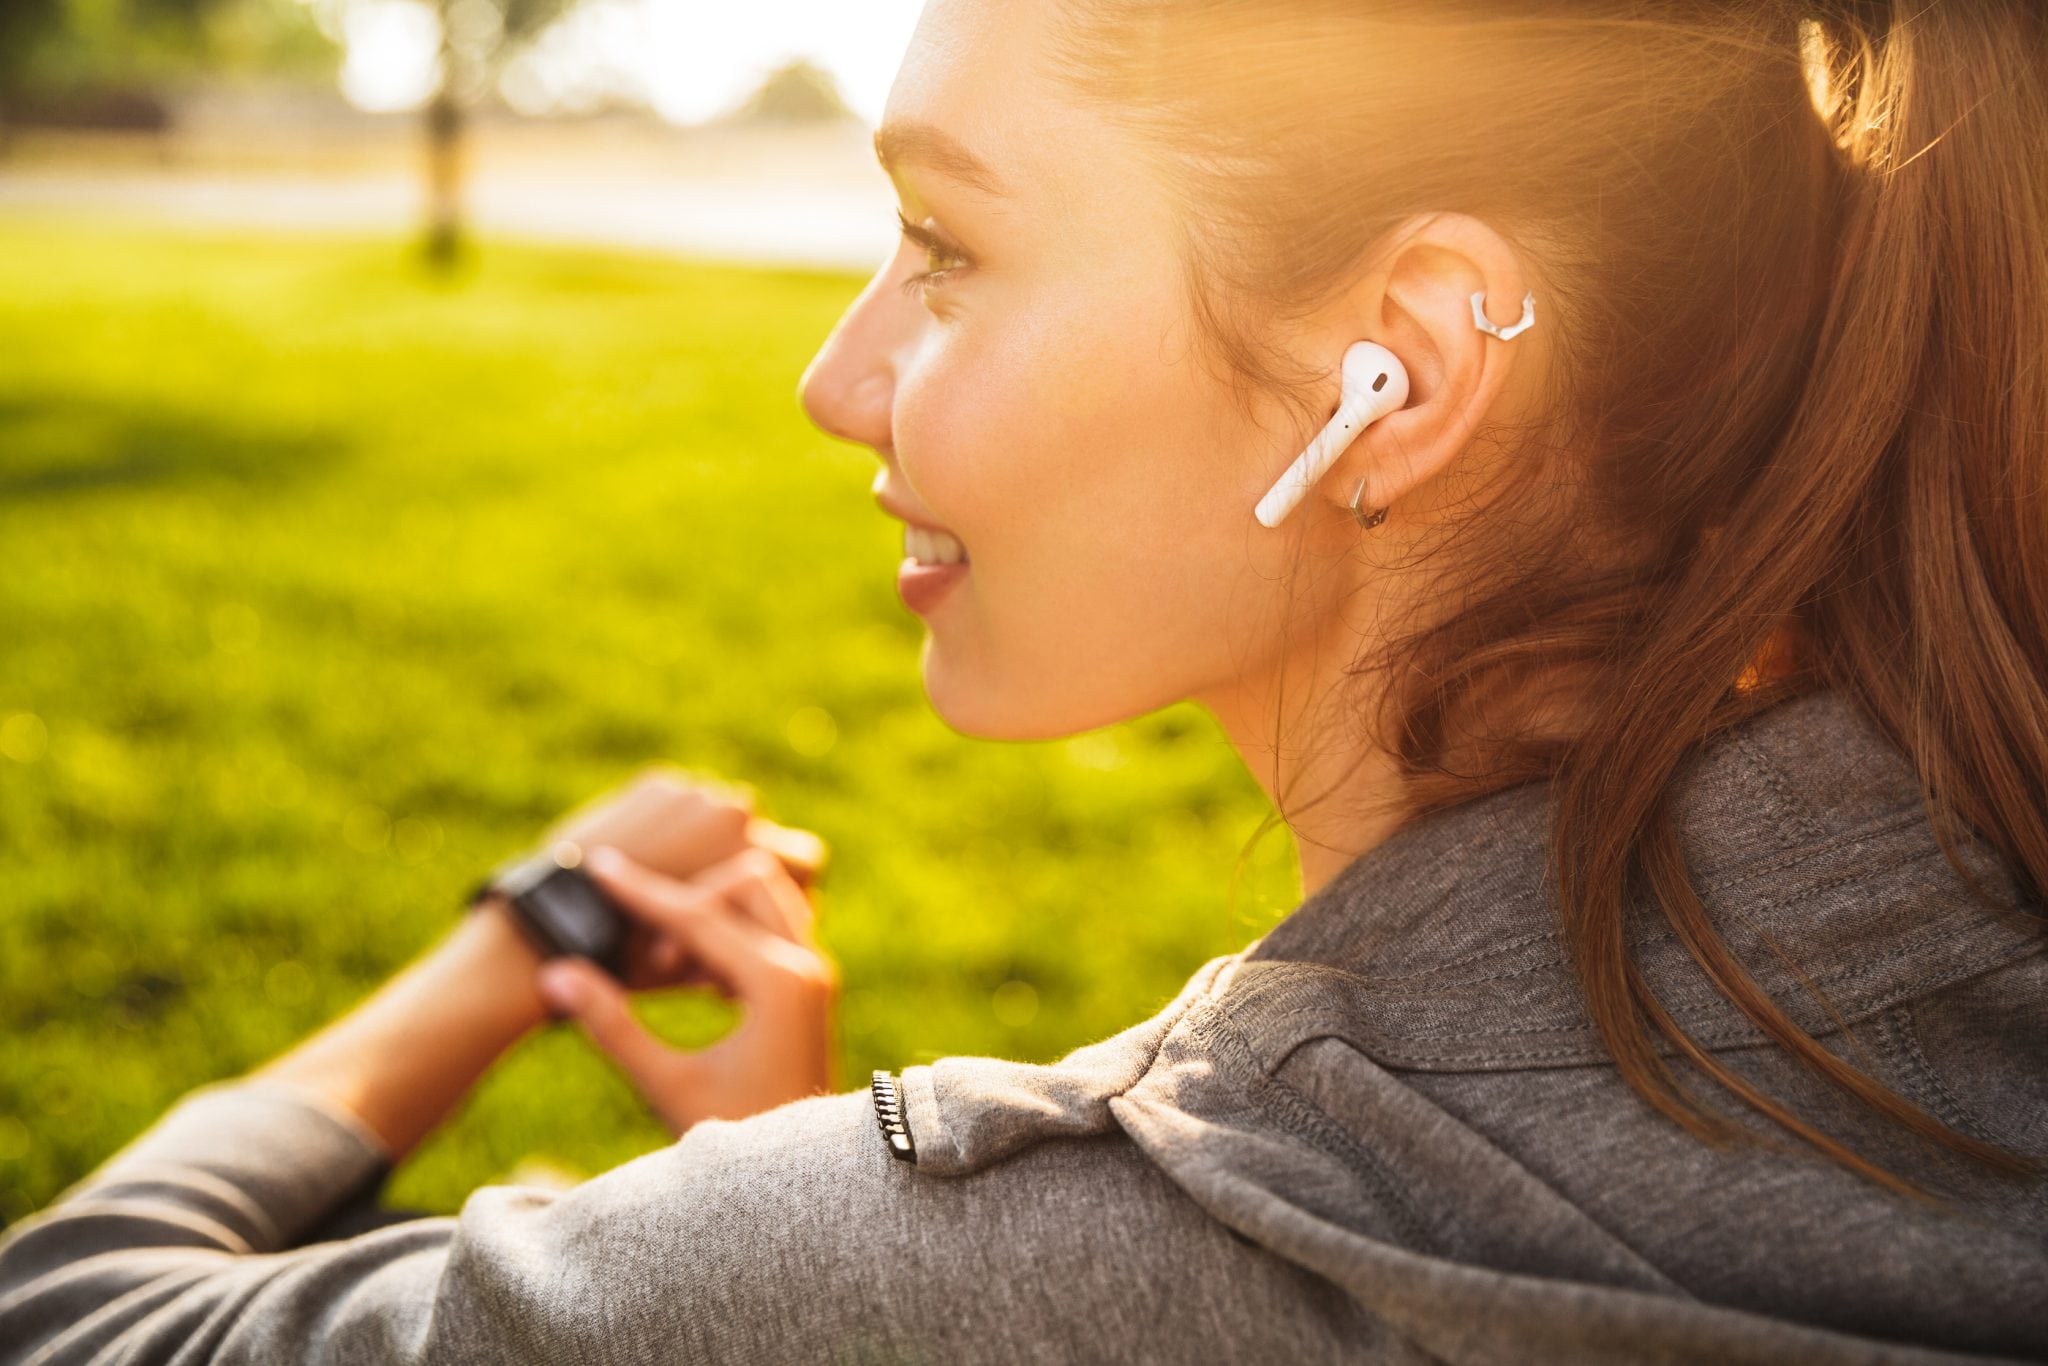 female runner wearing earbuds and checking smartphone